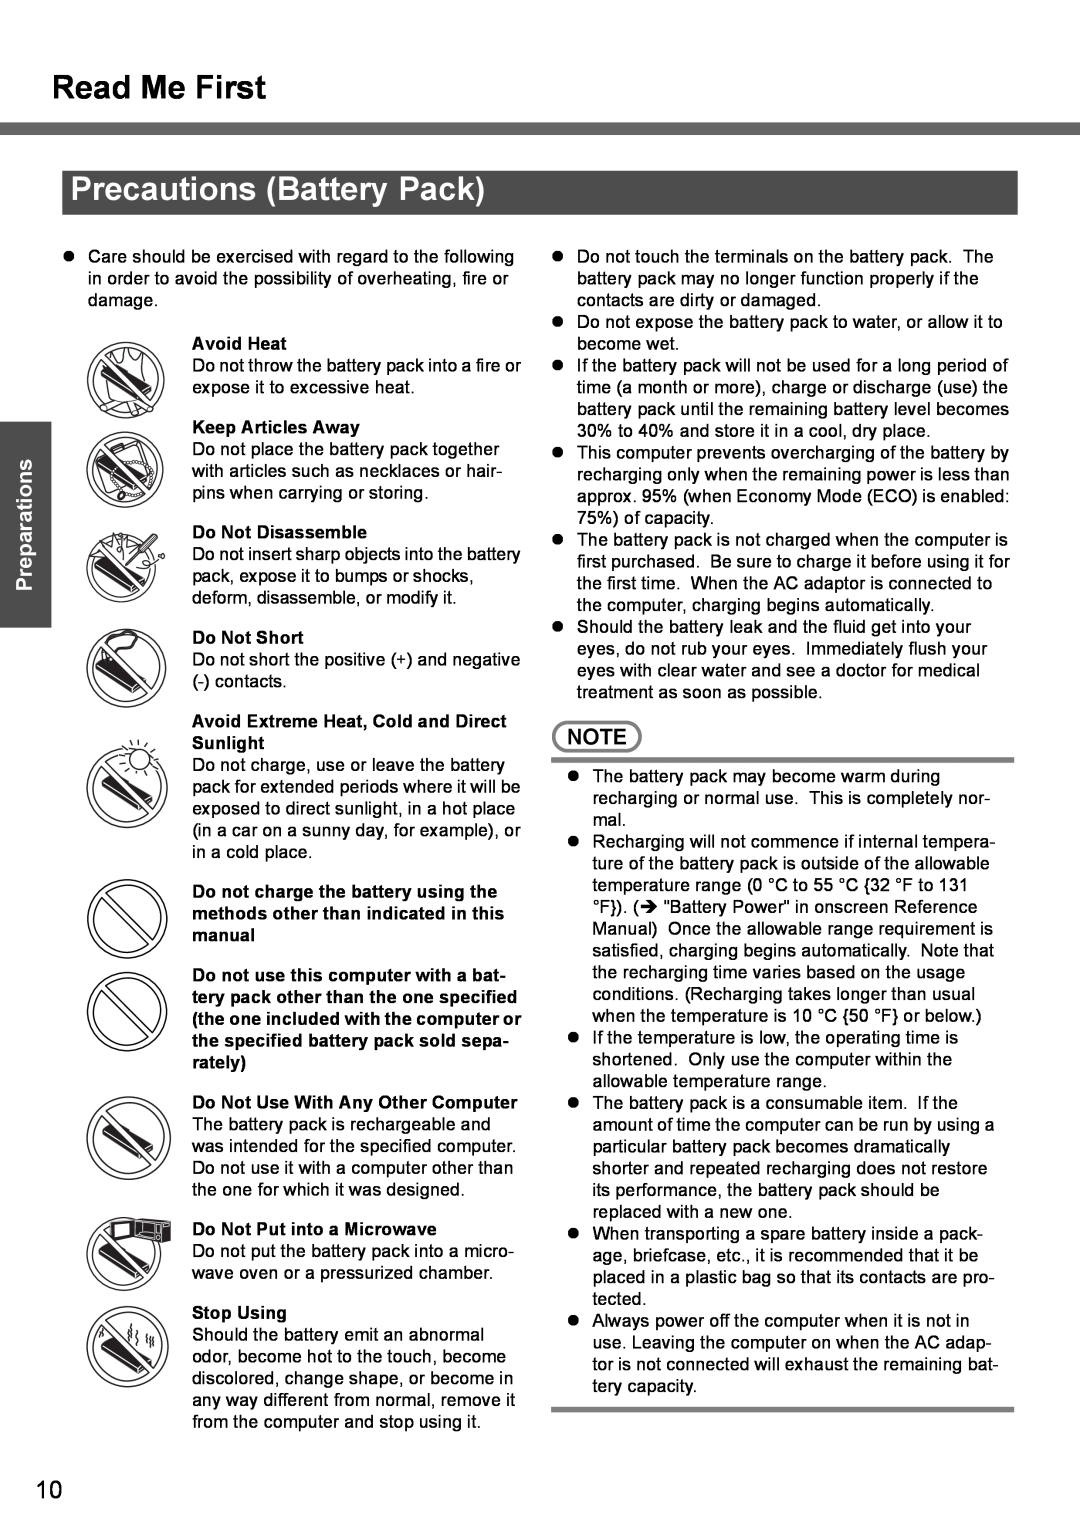 Panasonic CF-T4 operating instructions Precautions Battery Pack, Read Me First, Preparations 